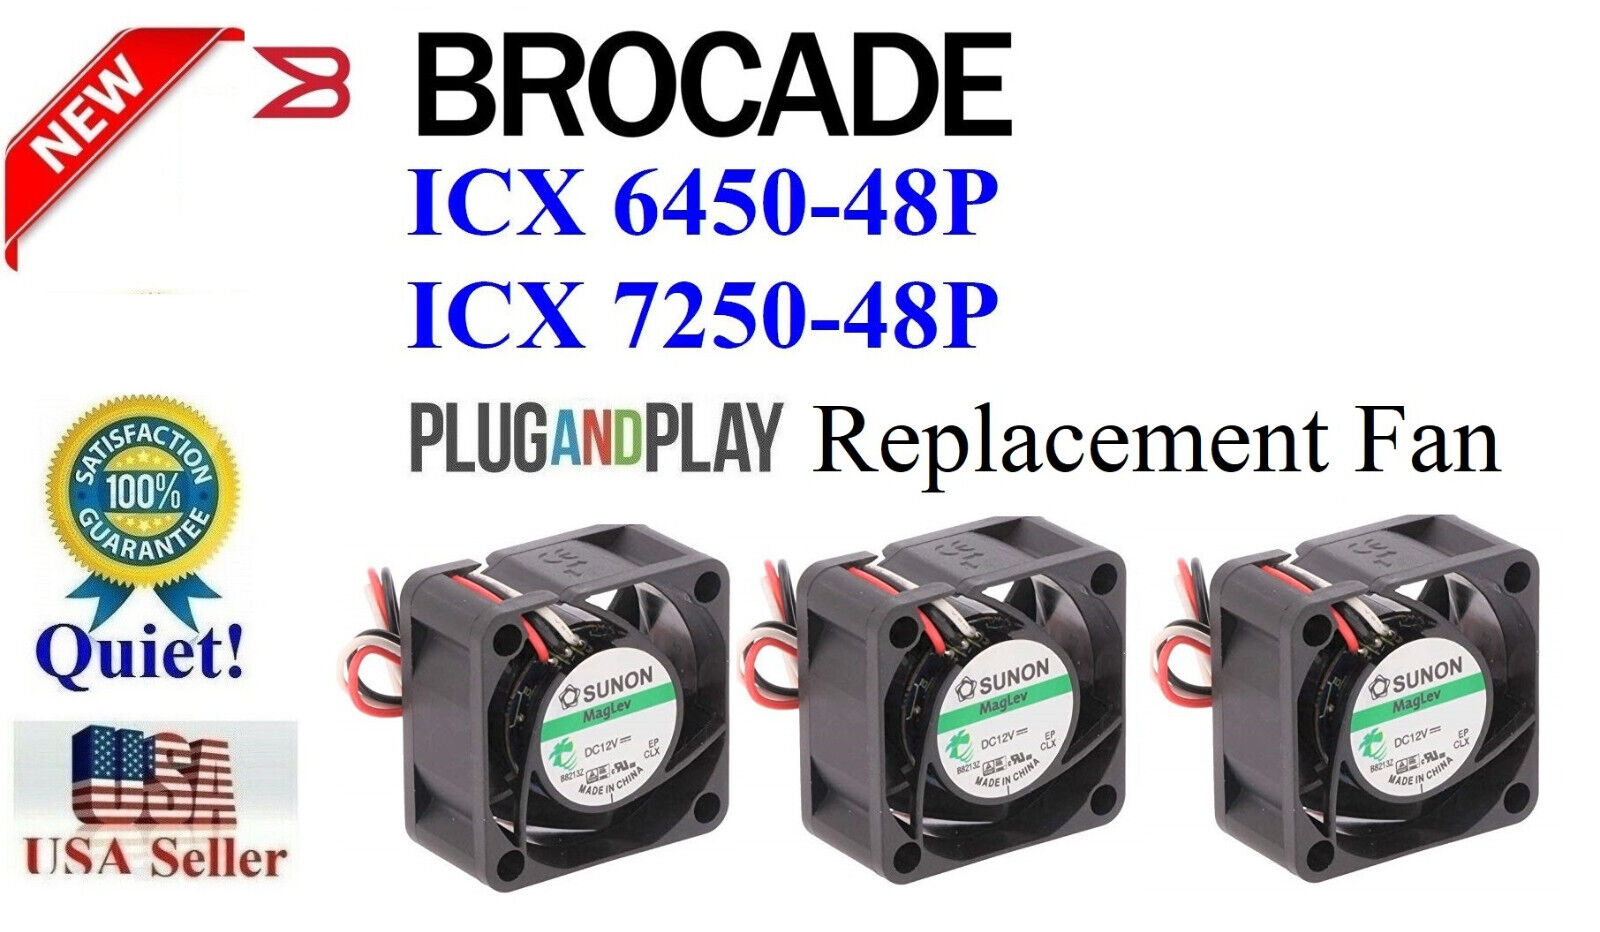 3x Quiet Replacement Fans for Brocade ICX 7250-48P (Plug-and-Play)